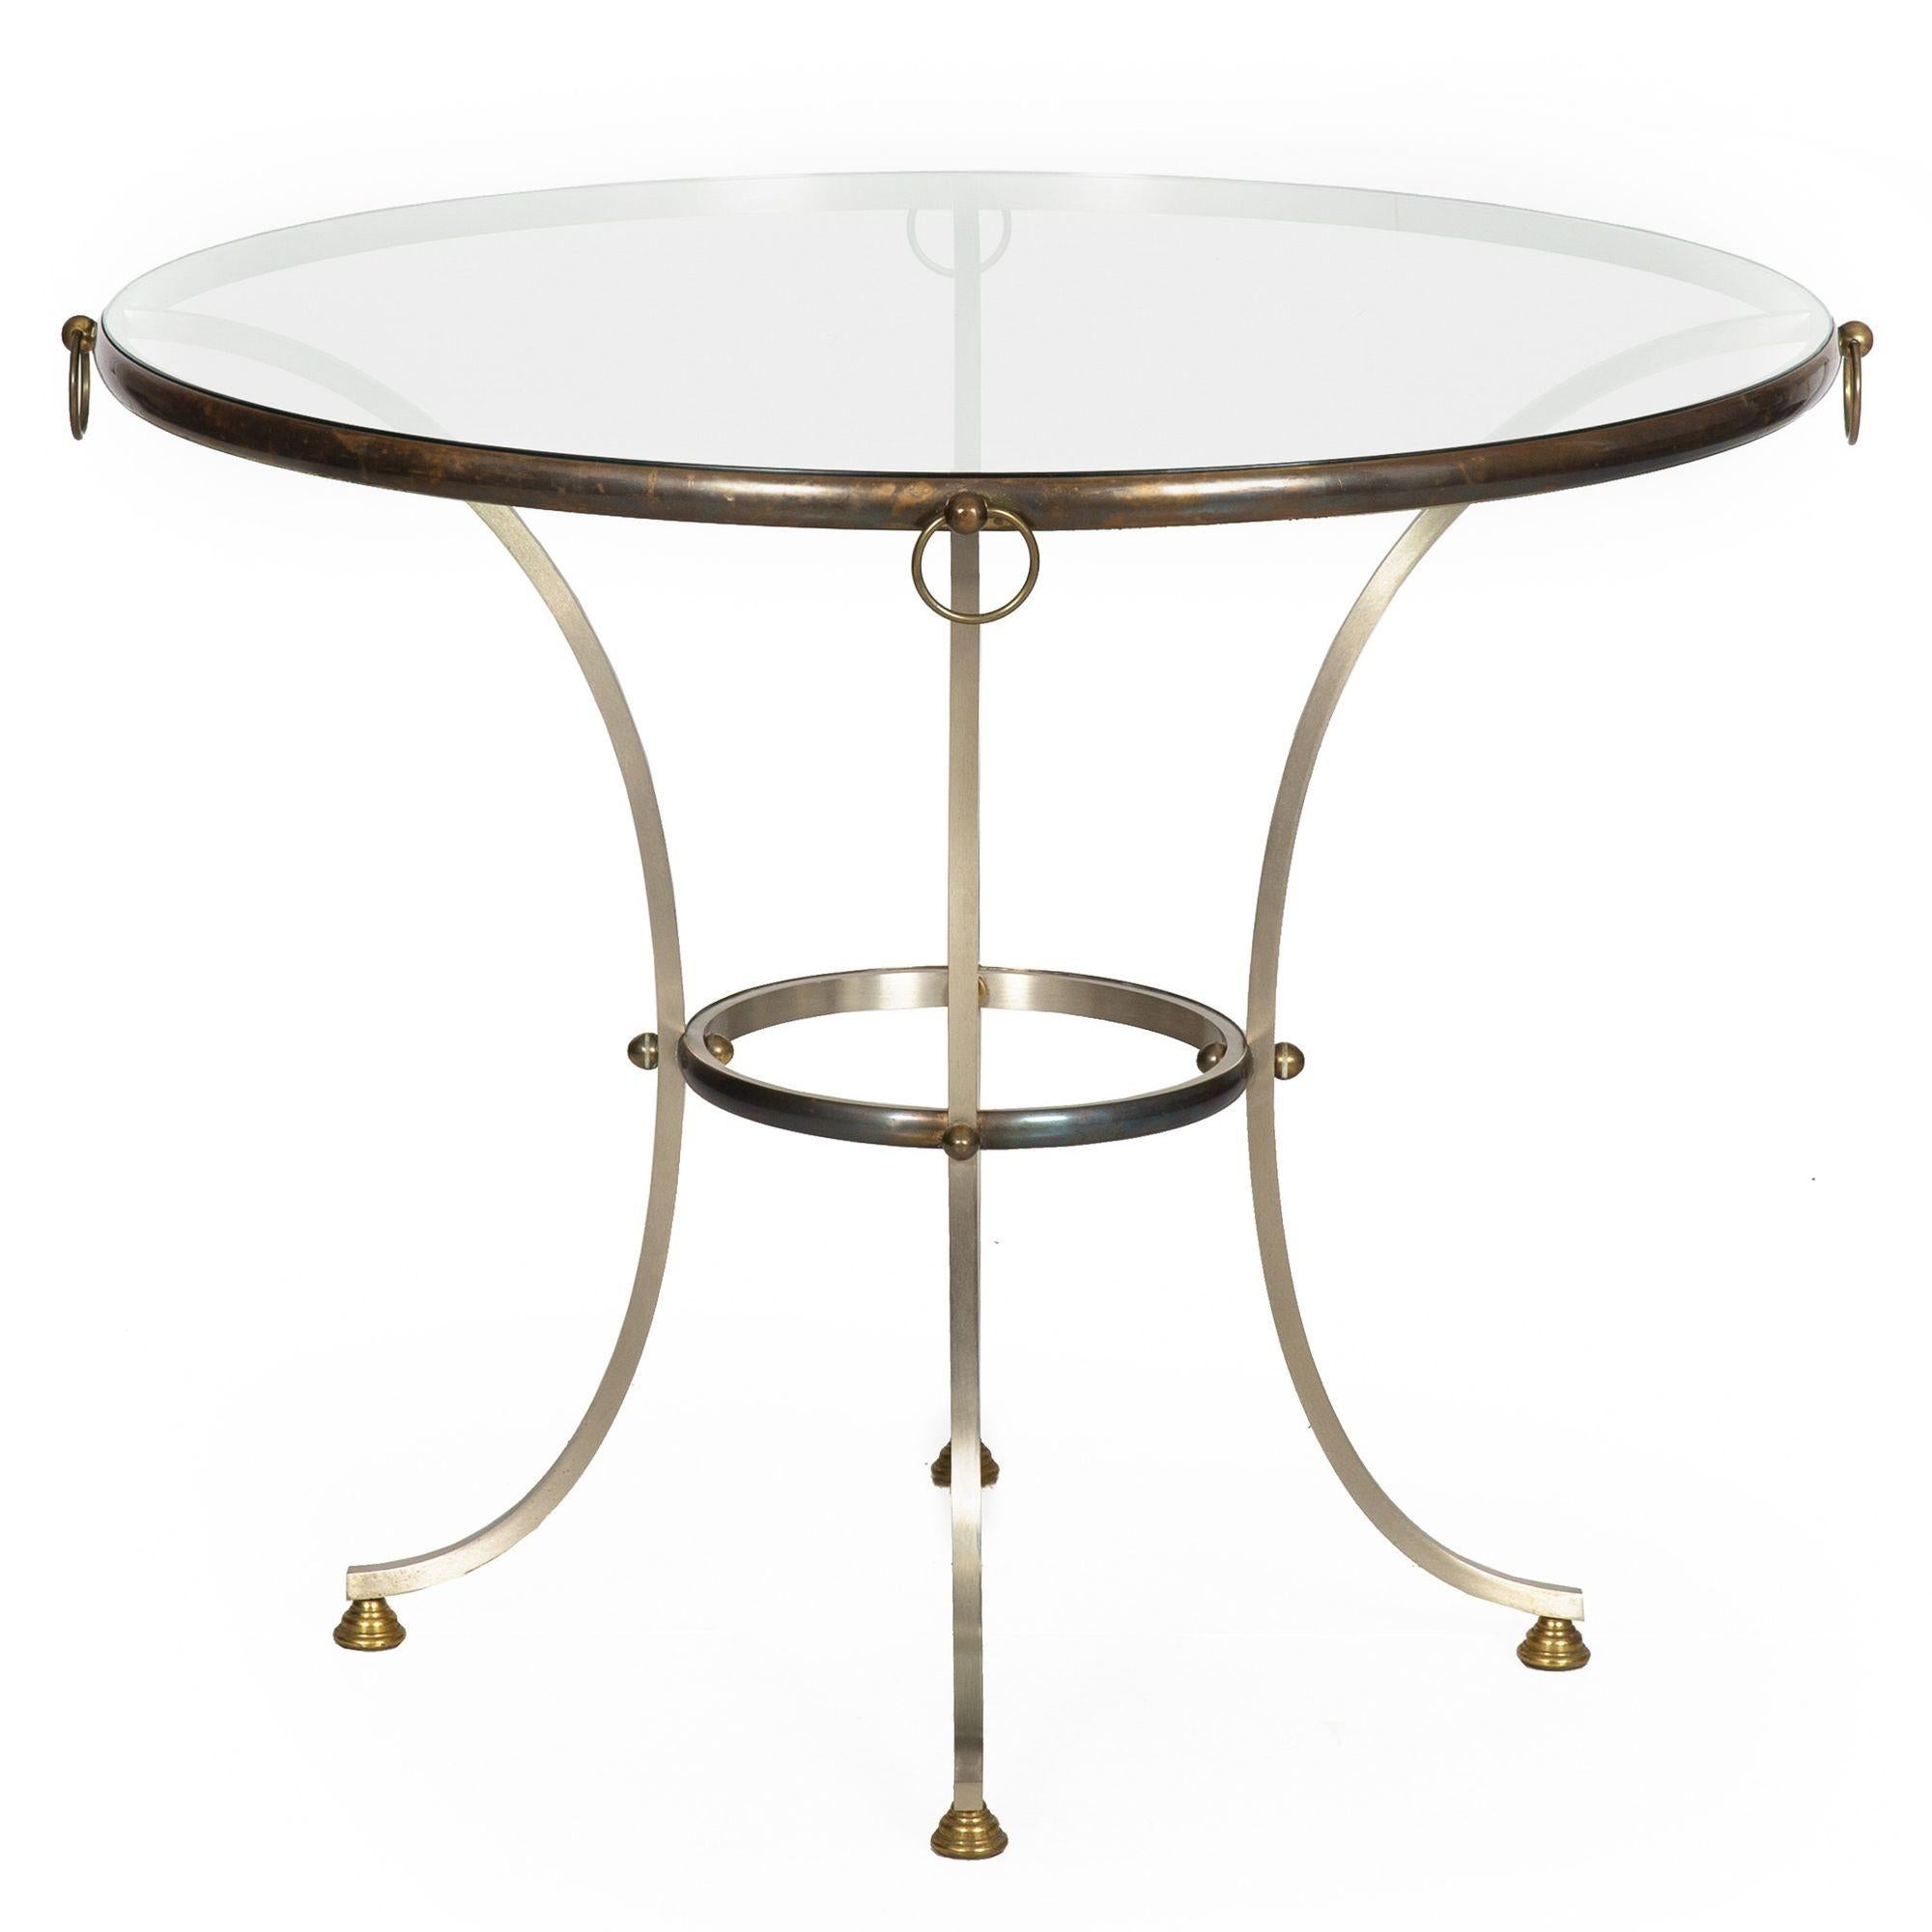 




HOLLYWOOD REGENCY BRUSHED STEEL, BRONZE, BRASS AND GLASS CENTER TABLE
Probably Italian circa 1970s  manner of Maison Jansen  unmarked
Item # 311XGP10P
An absolutely gorgeous vintage Hollywood Regency style circular center table, it features a